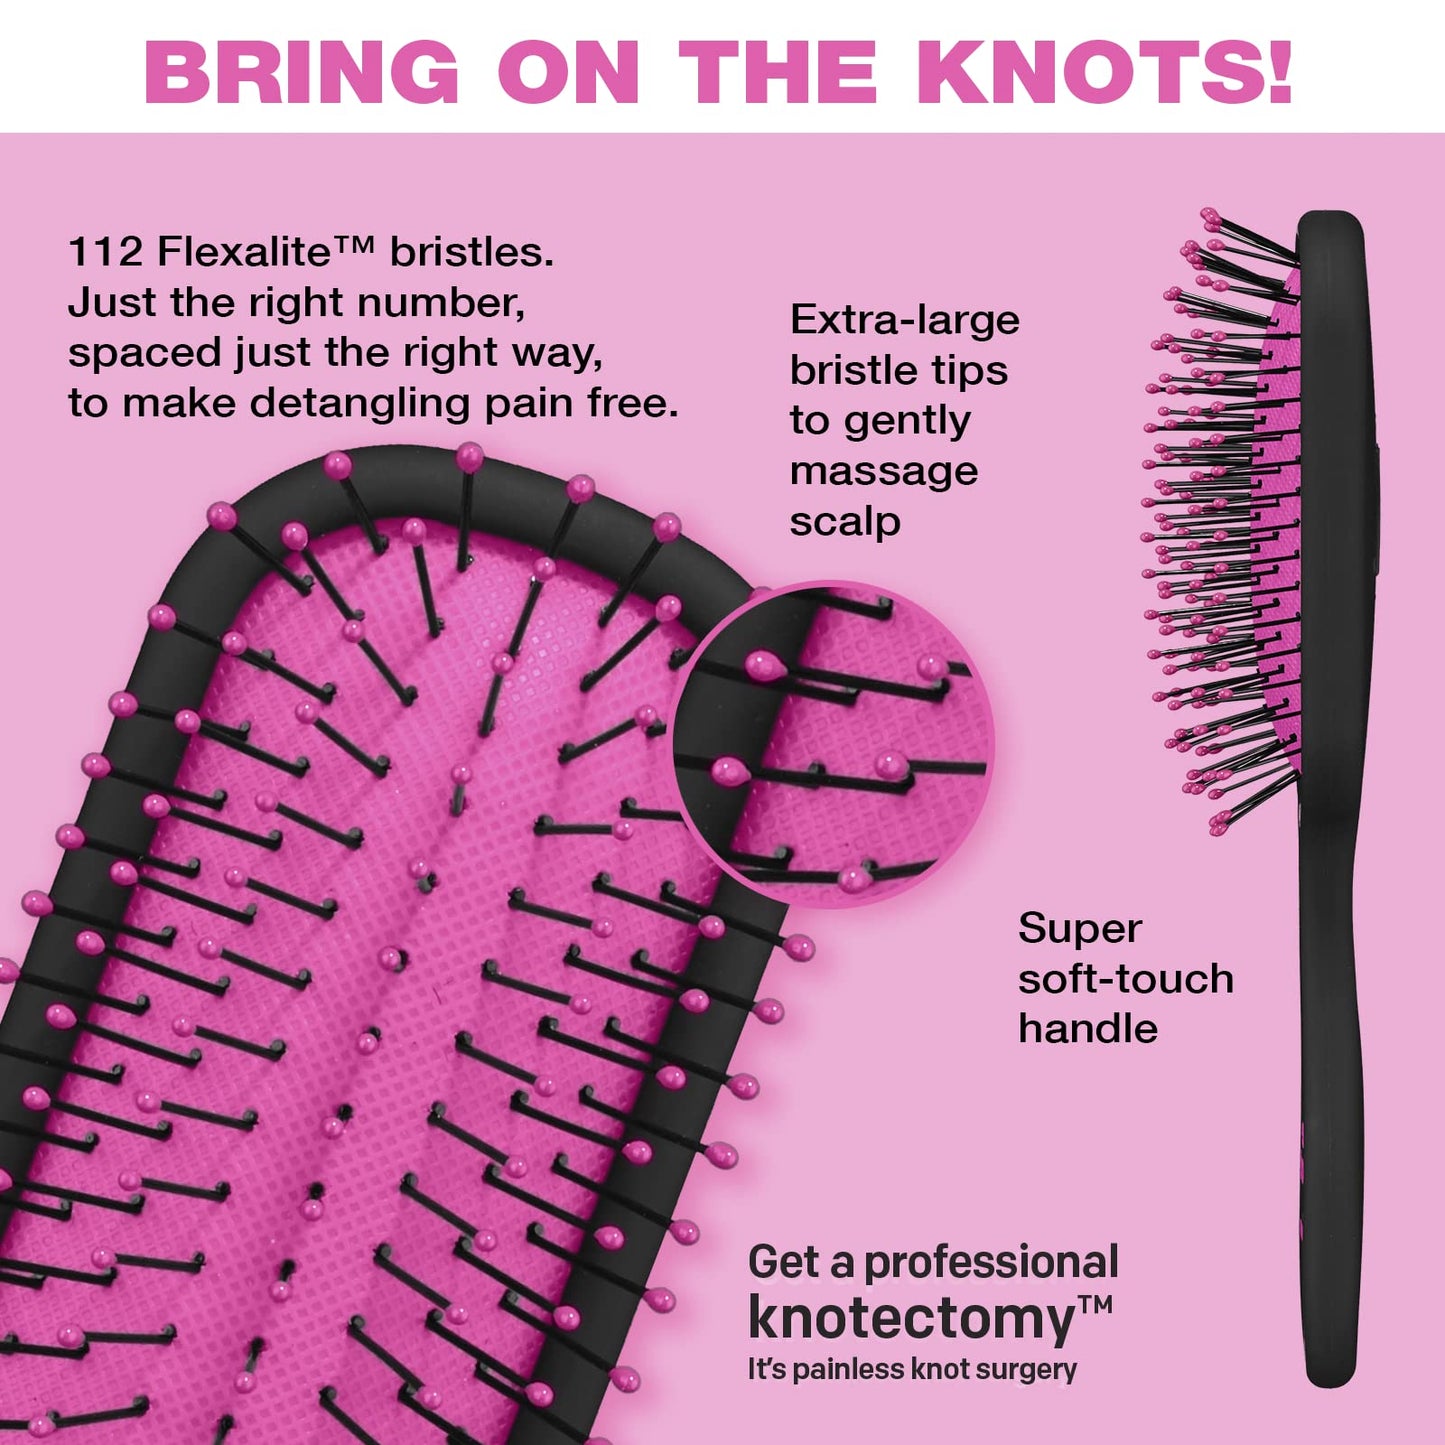 The Knot Dr. hair brush by Conair - Detangling hair brush - Travel Brush - wet brush - Removes Knots and Tangles in wet or dry hair- Pink